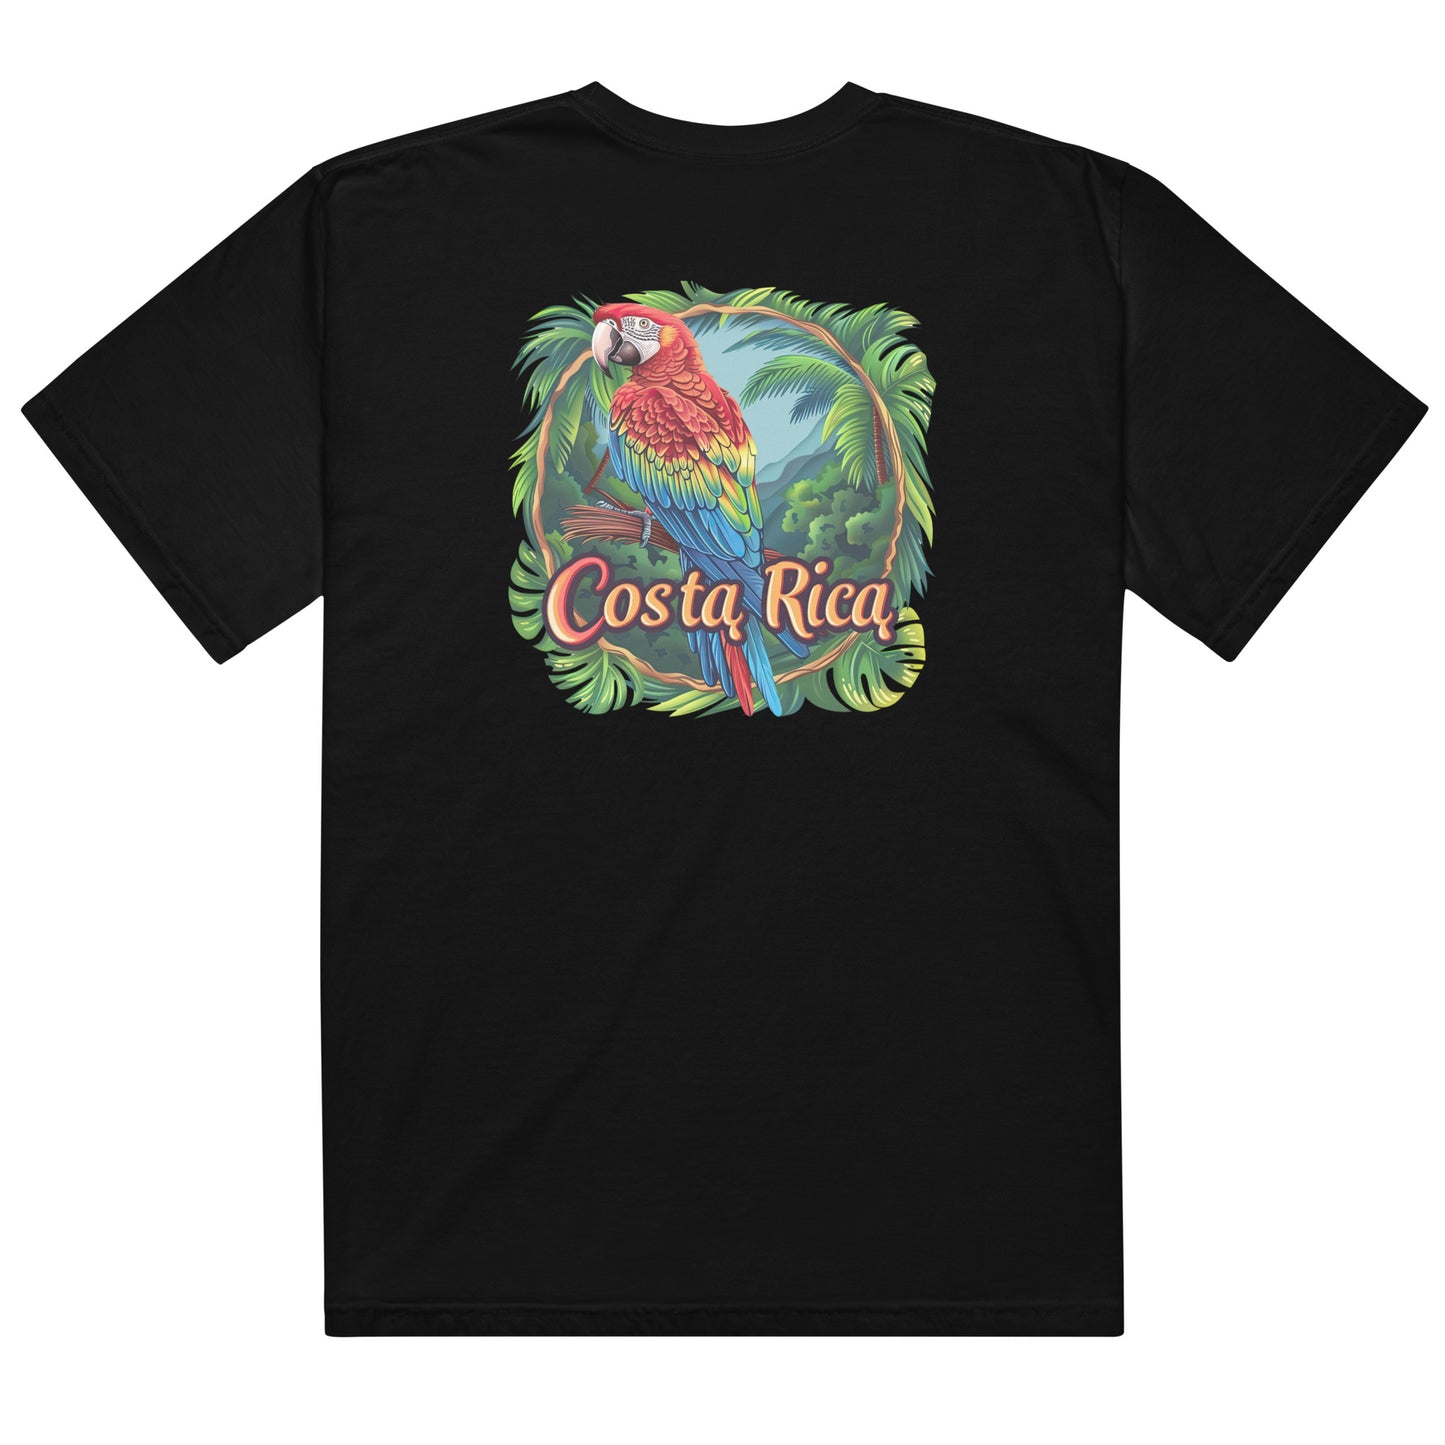 Costa Rica Scarlet Macaw Parrot Unisex t-shirt